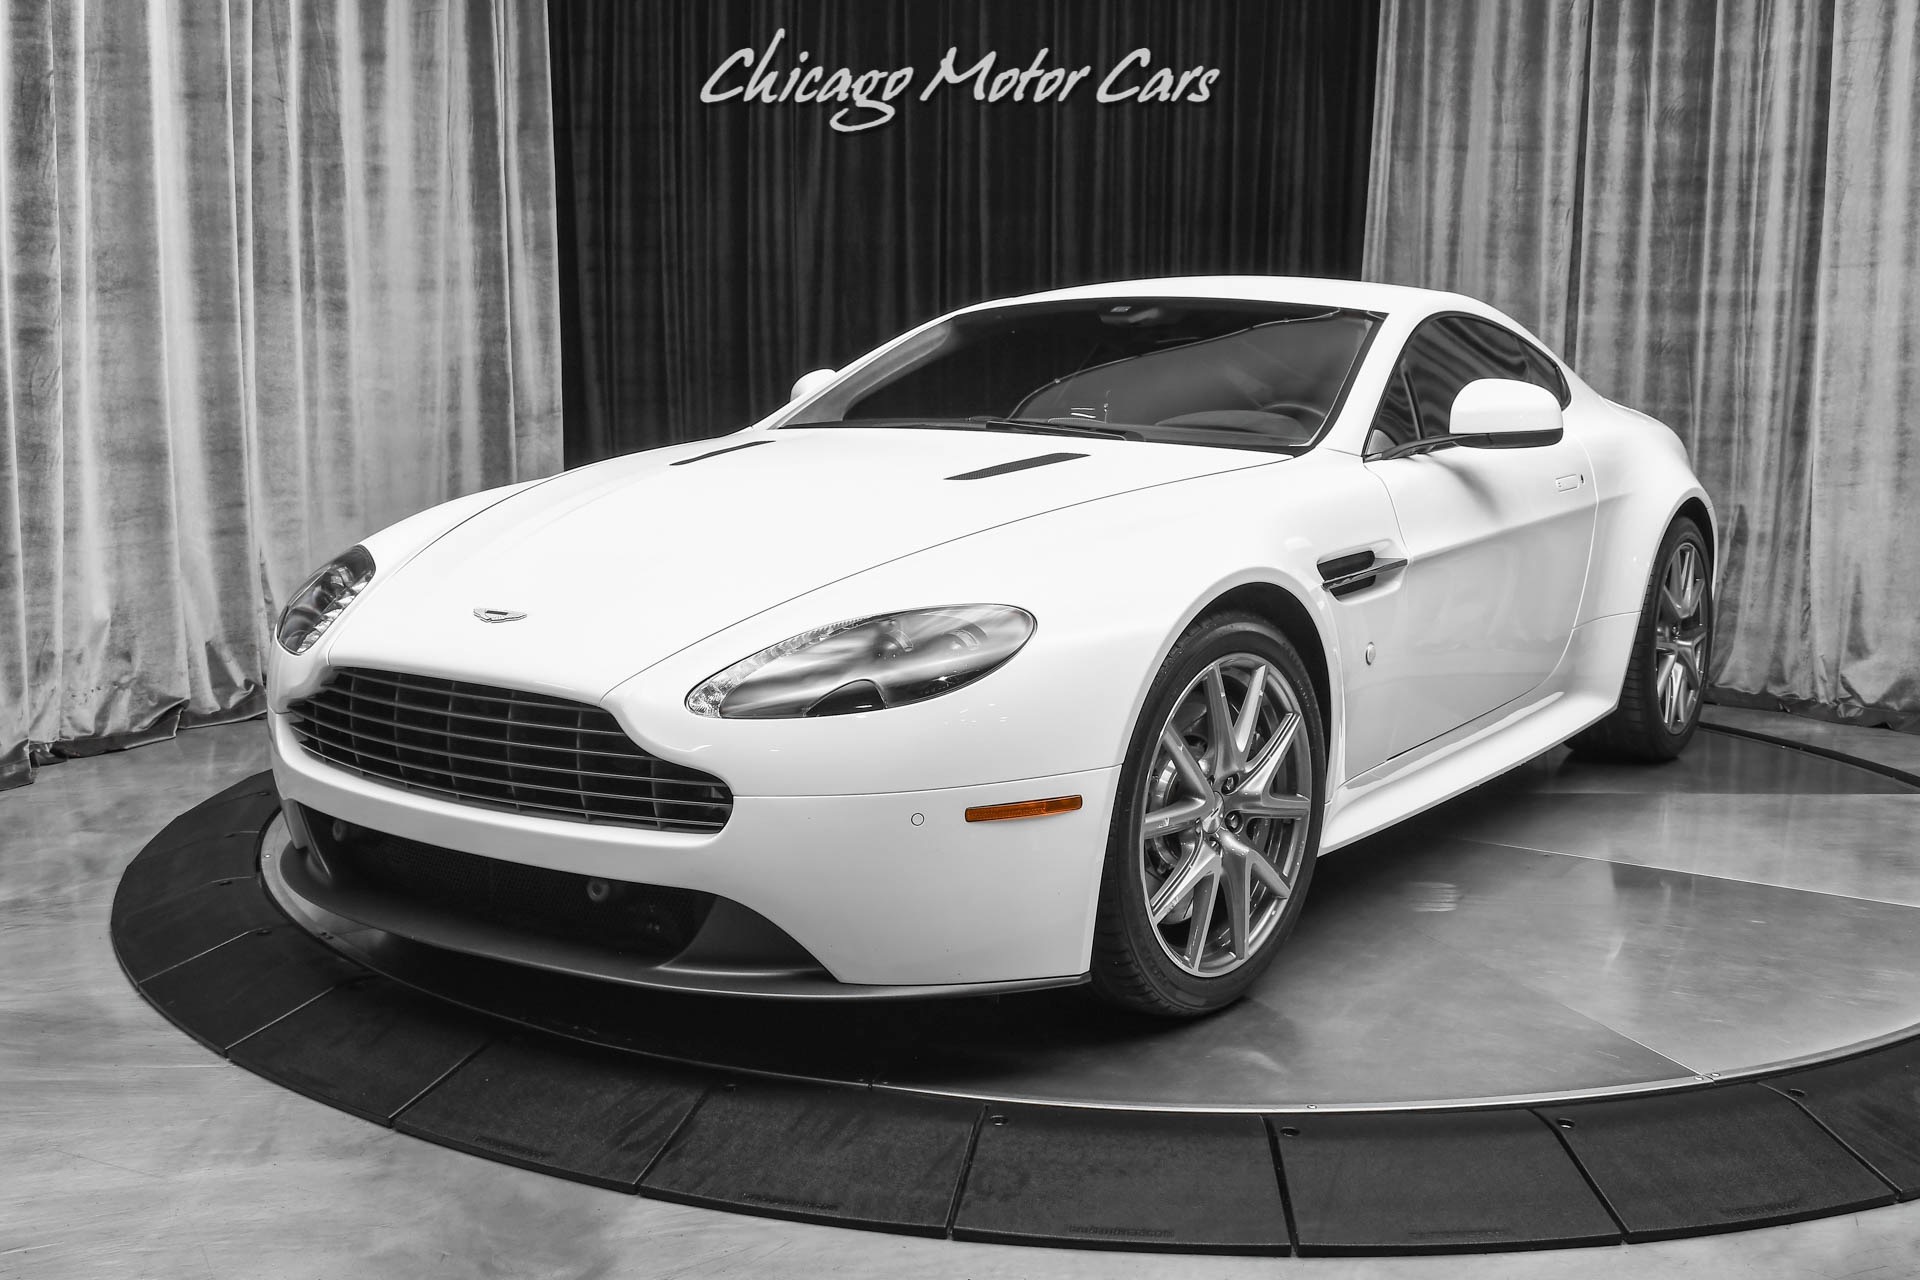 Used 2015 Aston Martin V8 Vantage GT Coupe Speedway White ONLY 8K Miles!  Well Equipped! For Sale (Special Pricing) | Chicago Motor Cars Stock #19140